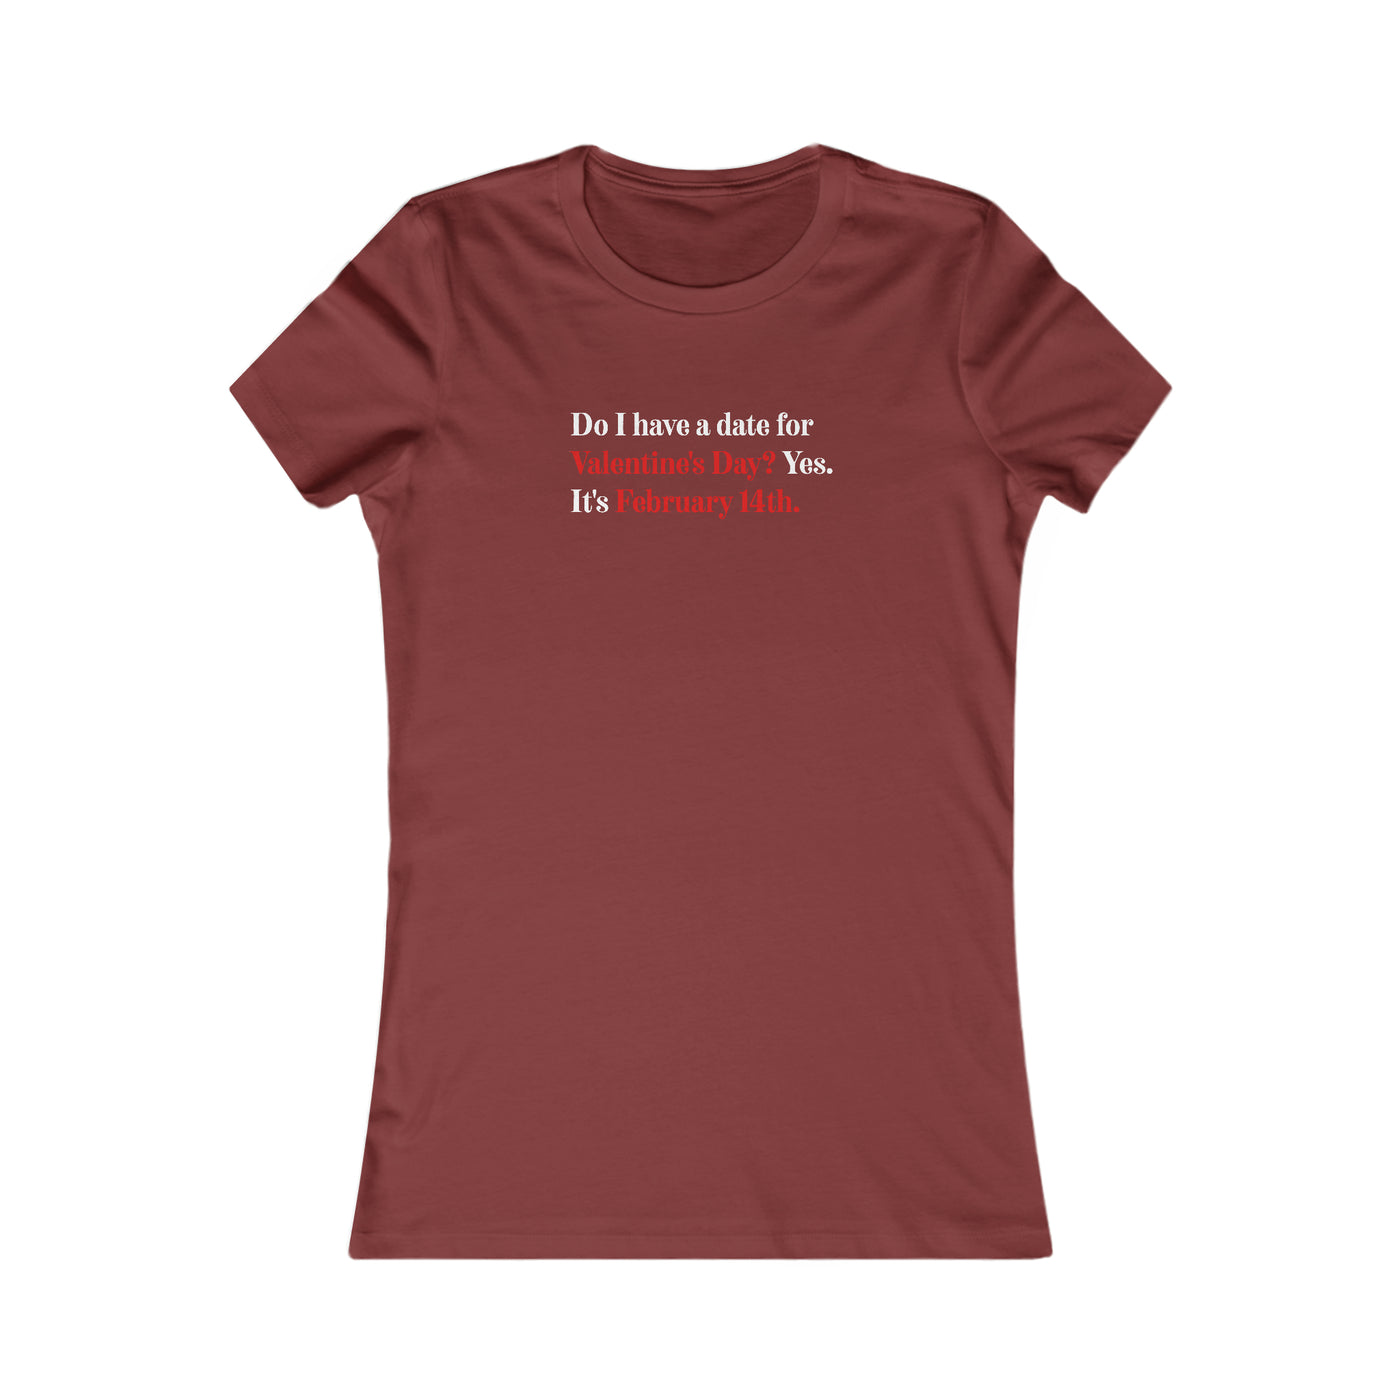 Do I Have A Date For Valentine's Day? Yes, It's February 14th Women's Favorite Tee